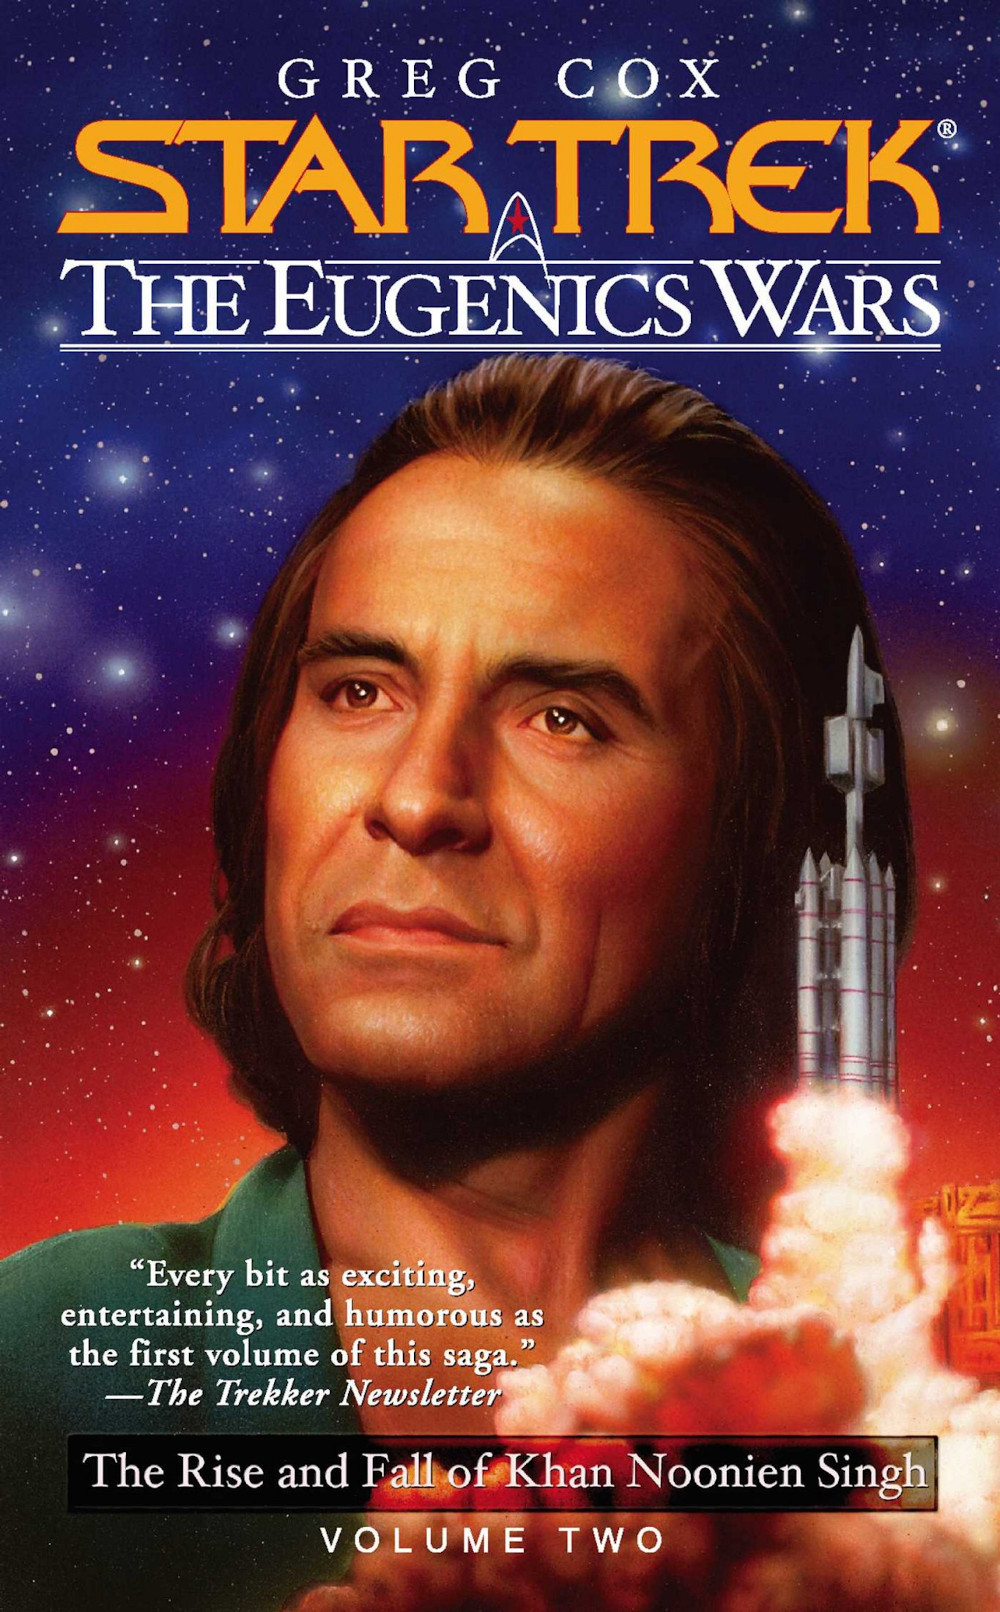 The Eugenics Wars: The Rise and Fall of Khan Noonien Singh, Book Two (Apr 2002)